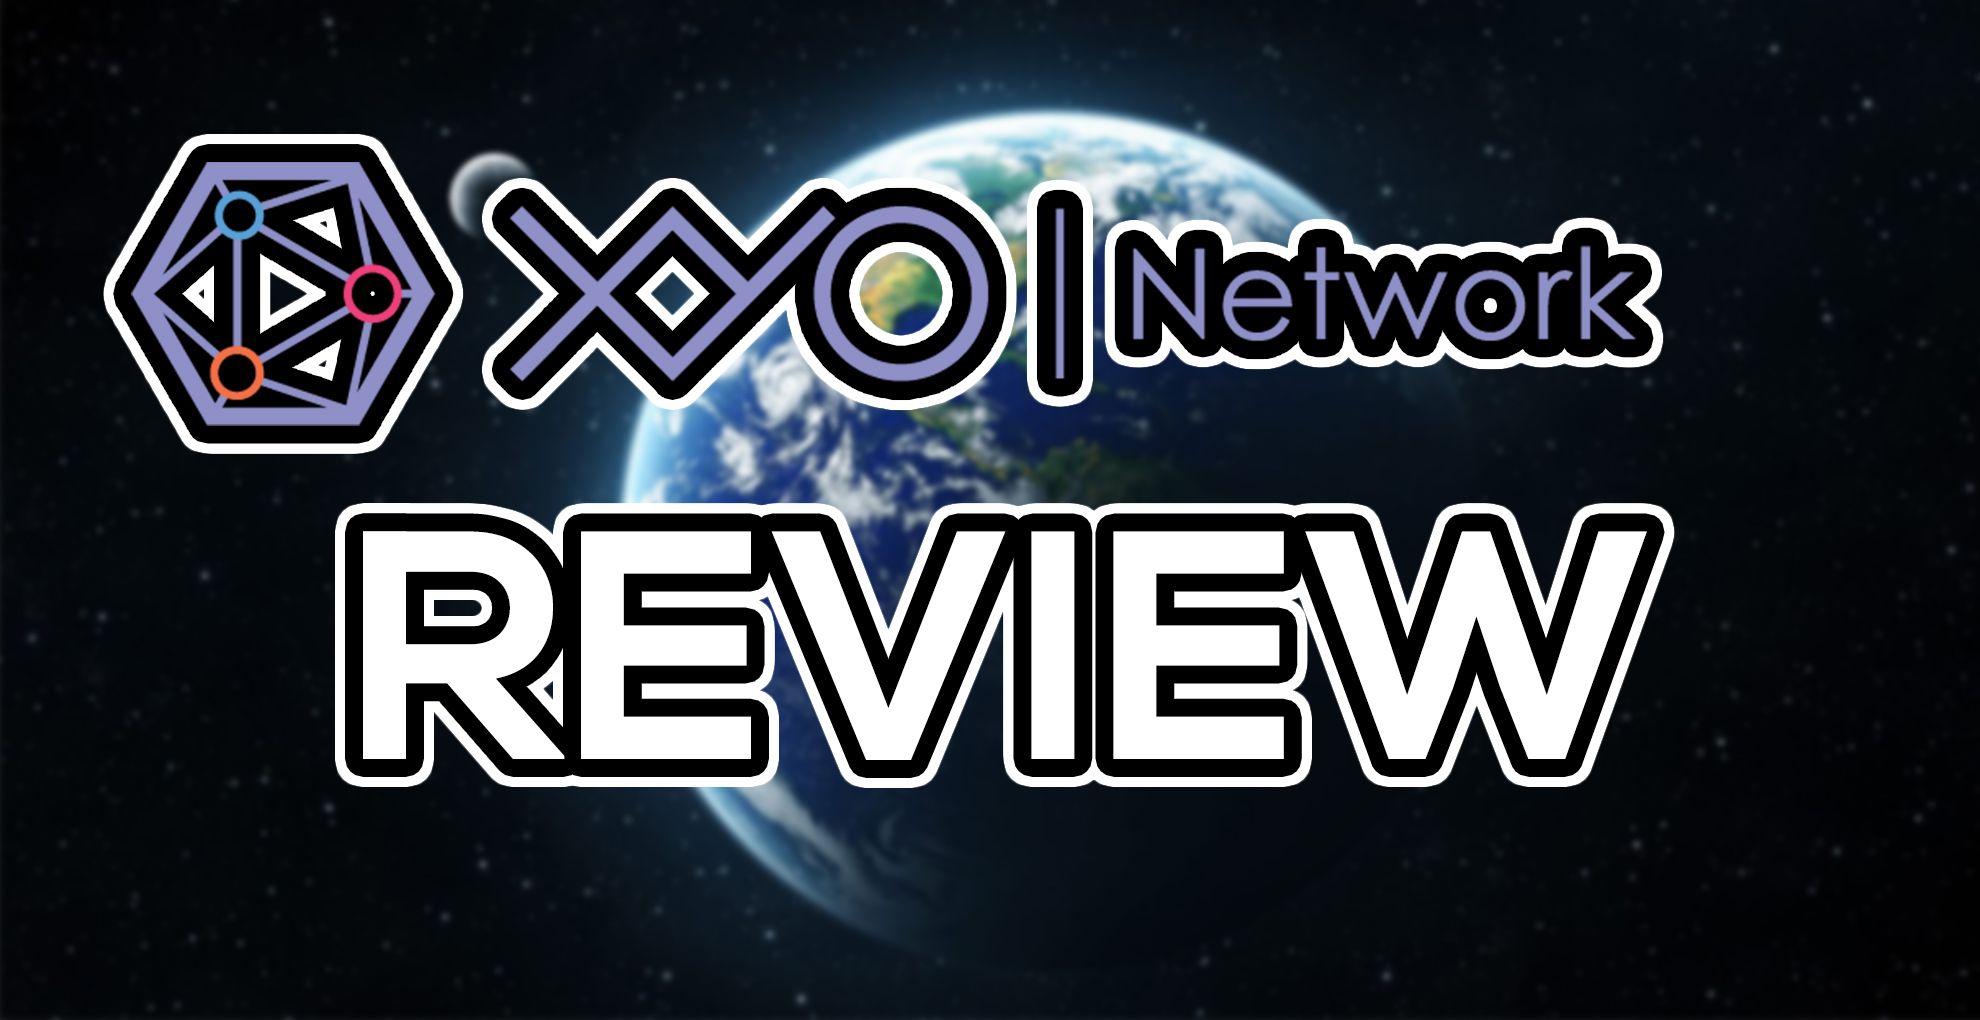 xyo network review.jpg